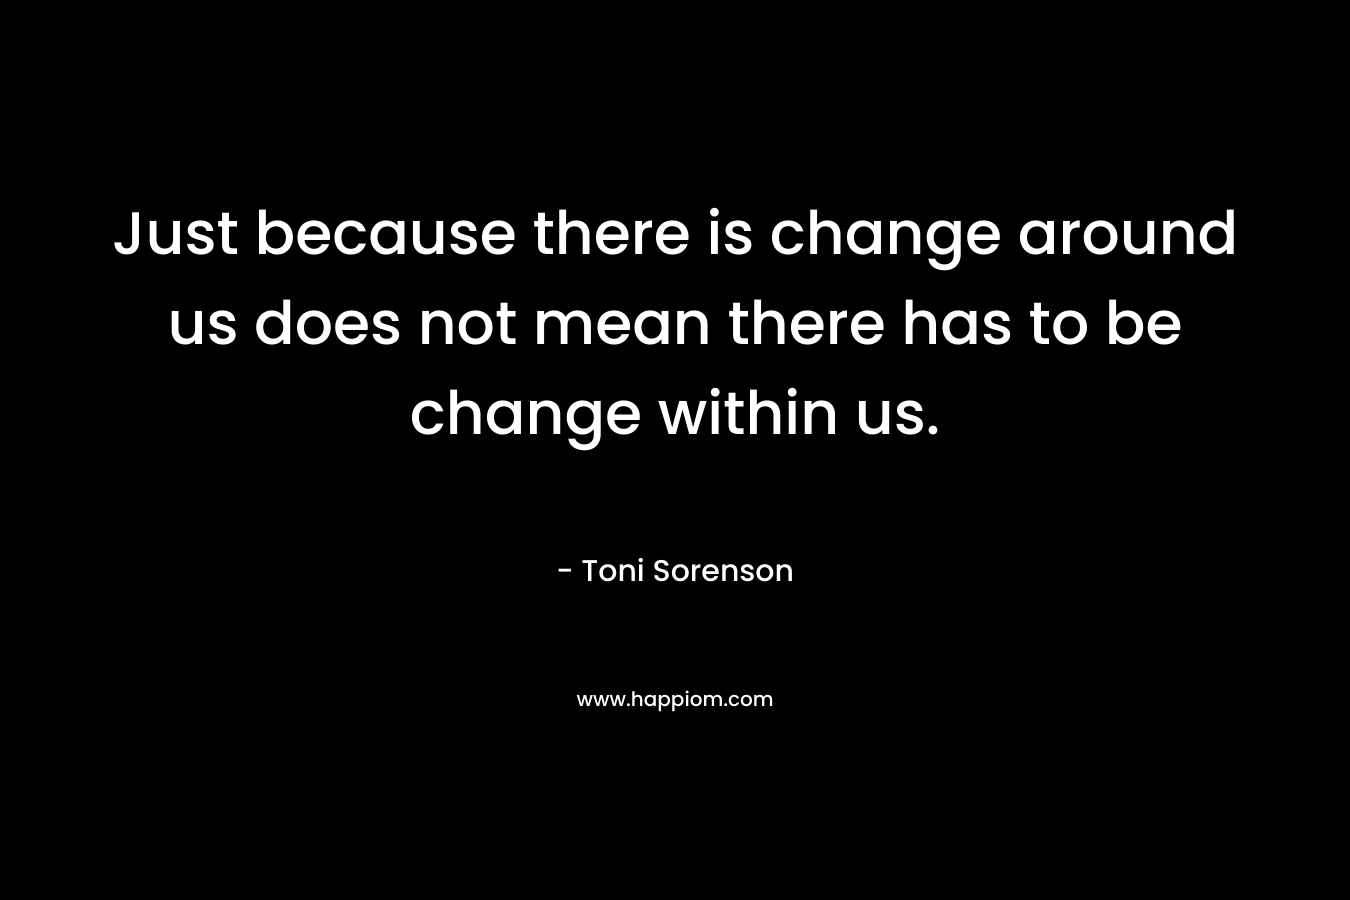 Just because there is change around us does not mean there has to be change within us.